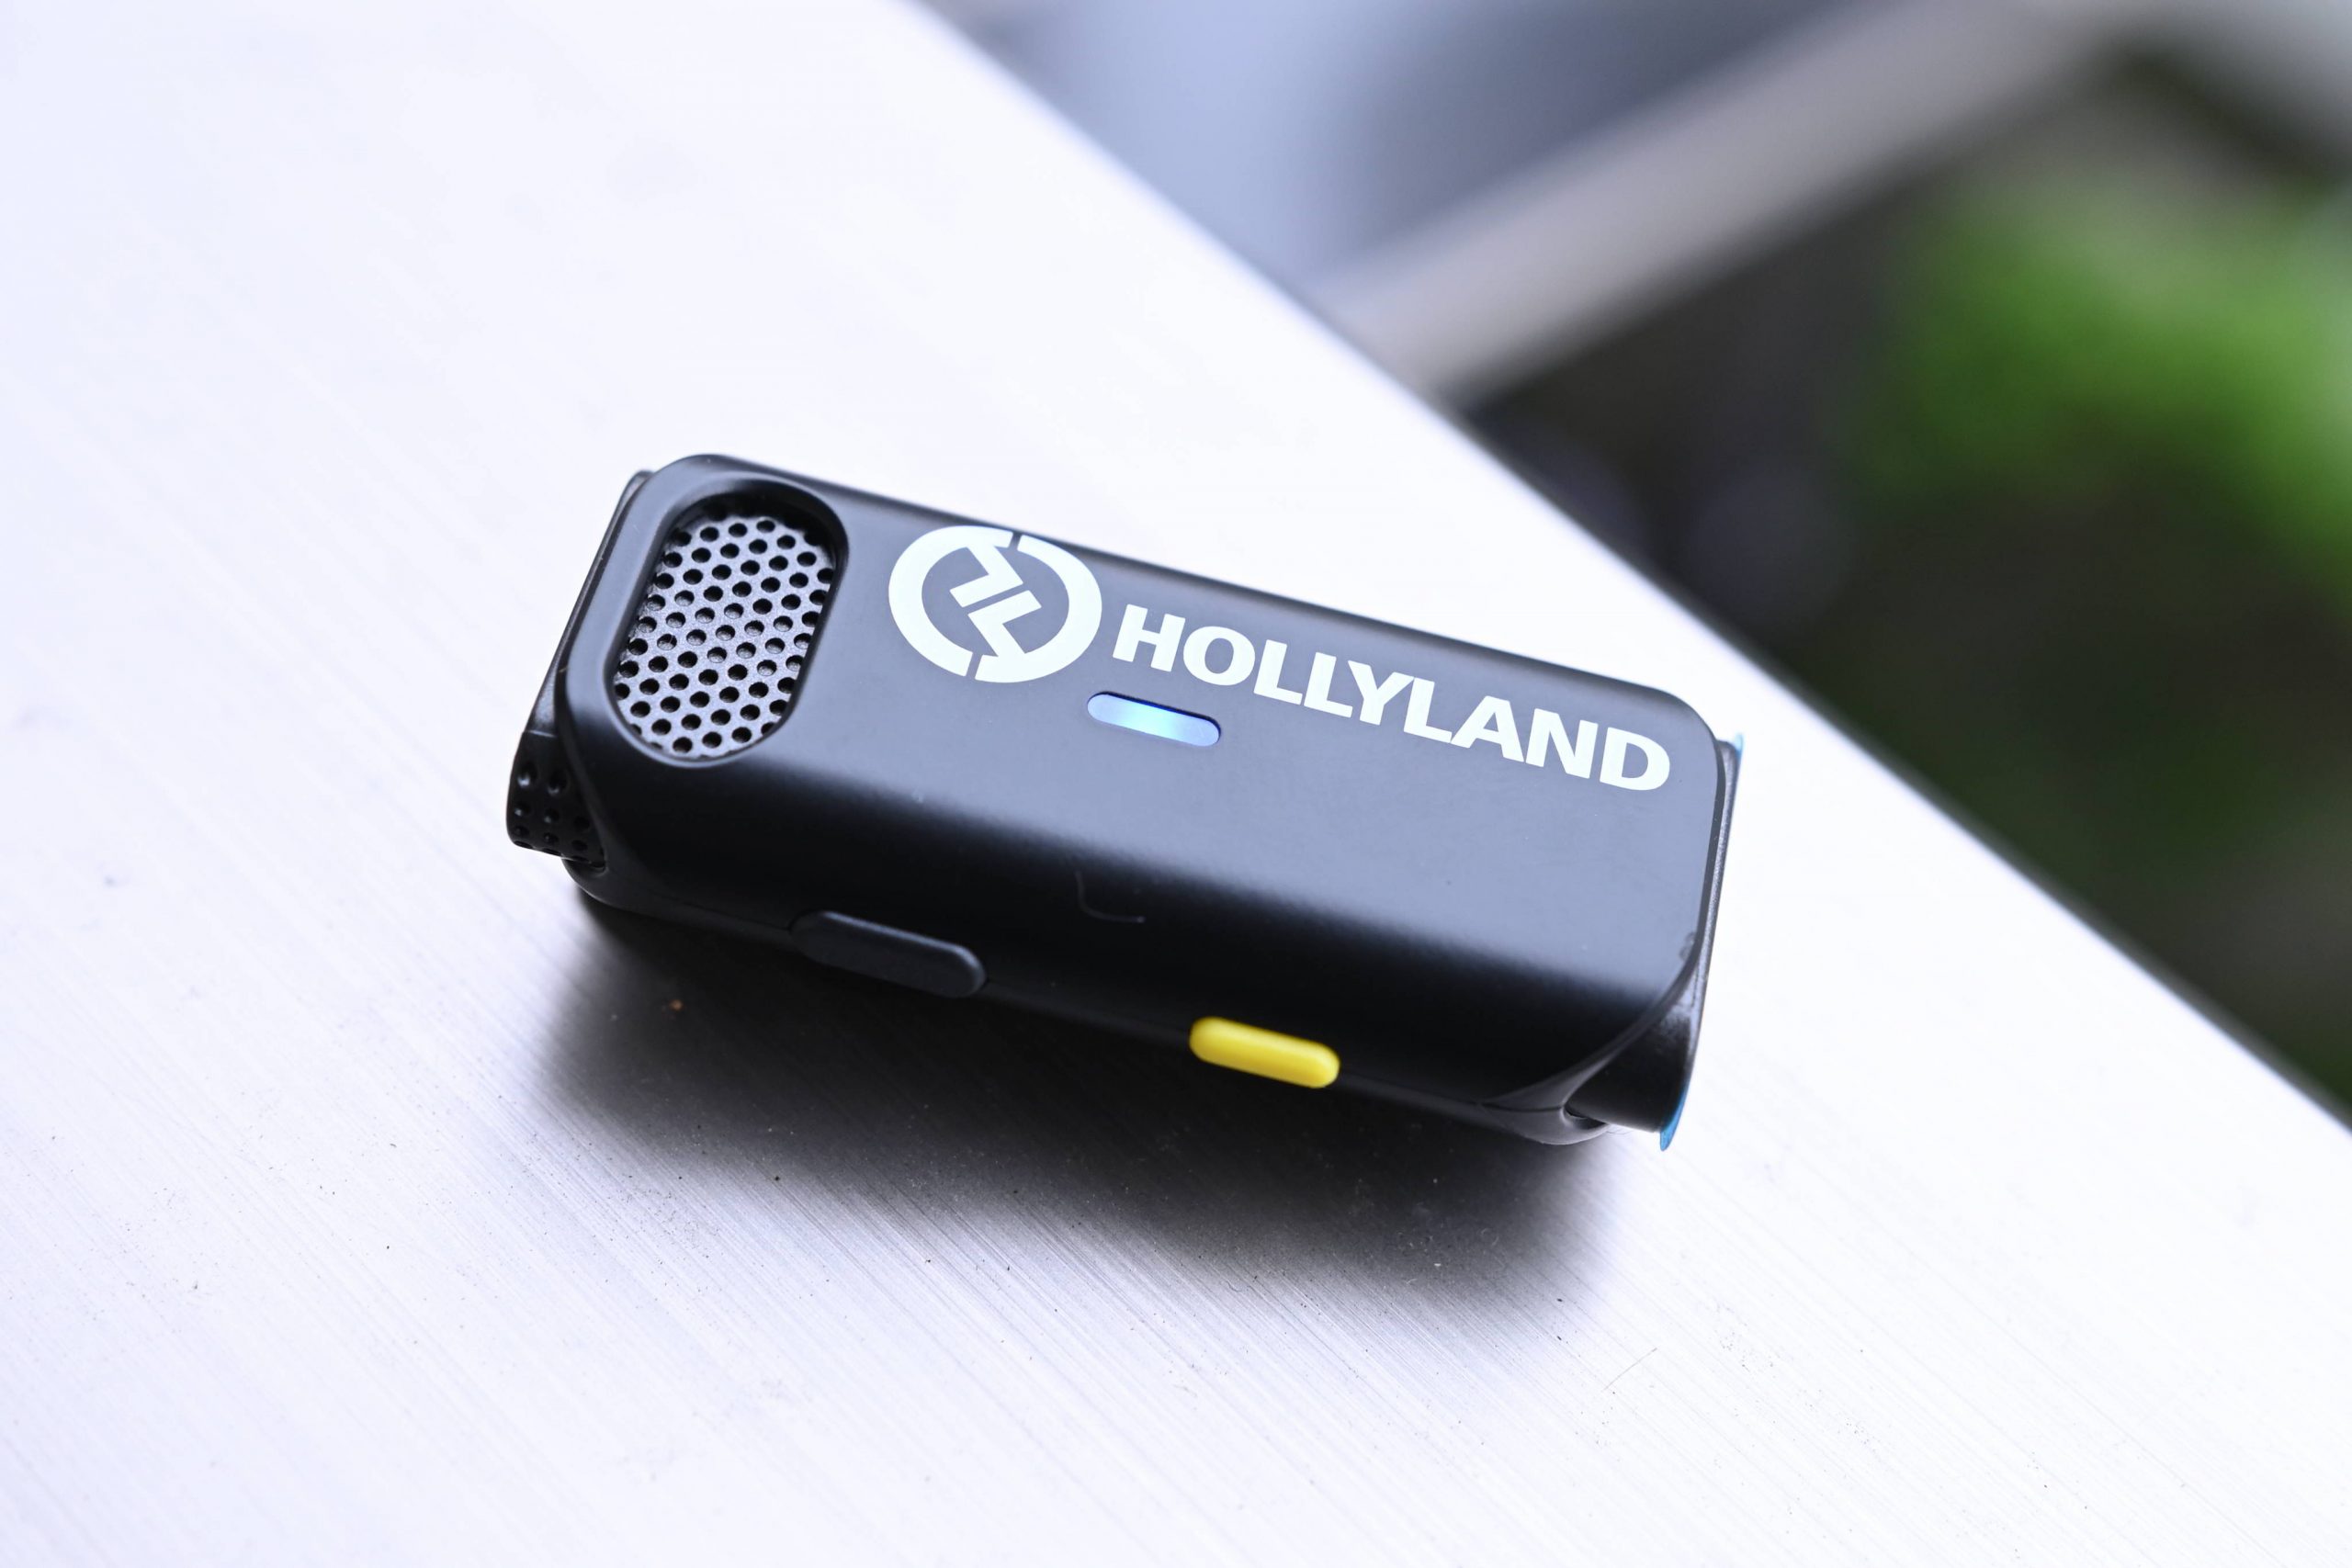 Hollyland Lark C1 Review - Newsshooter